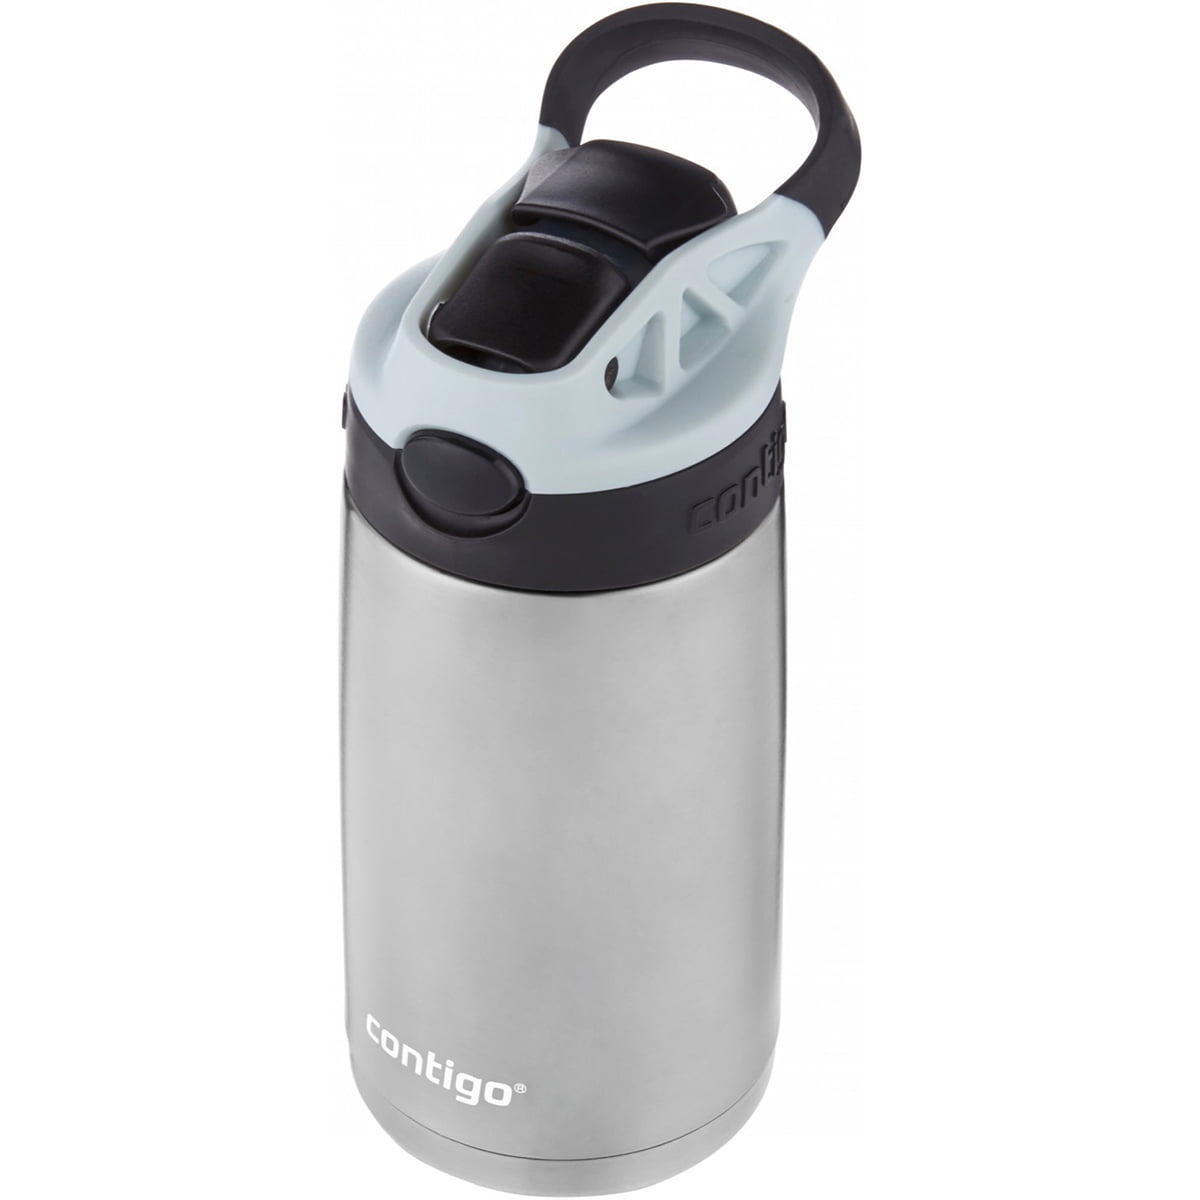 Contigo 13oz Kids Stainless Steel Water Bottle with Redesigned AutoSpout  Straw Whales and Turtles 1 ct